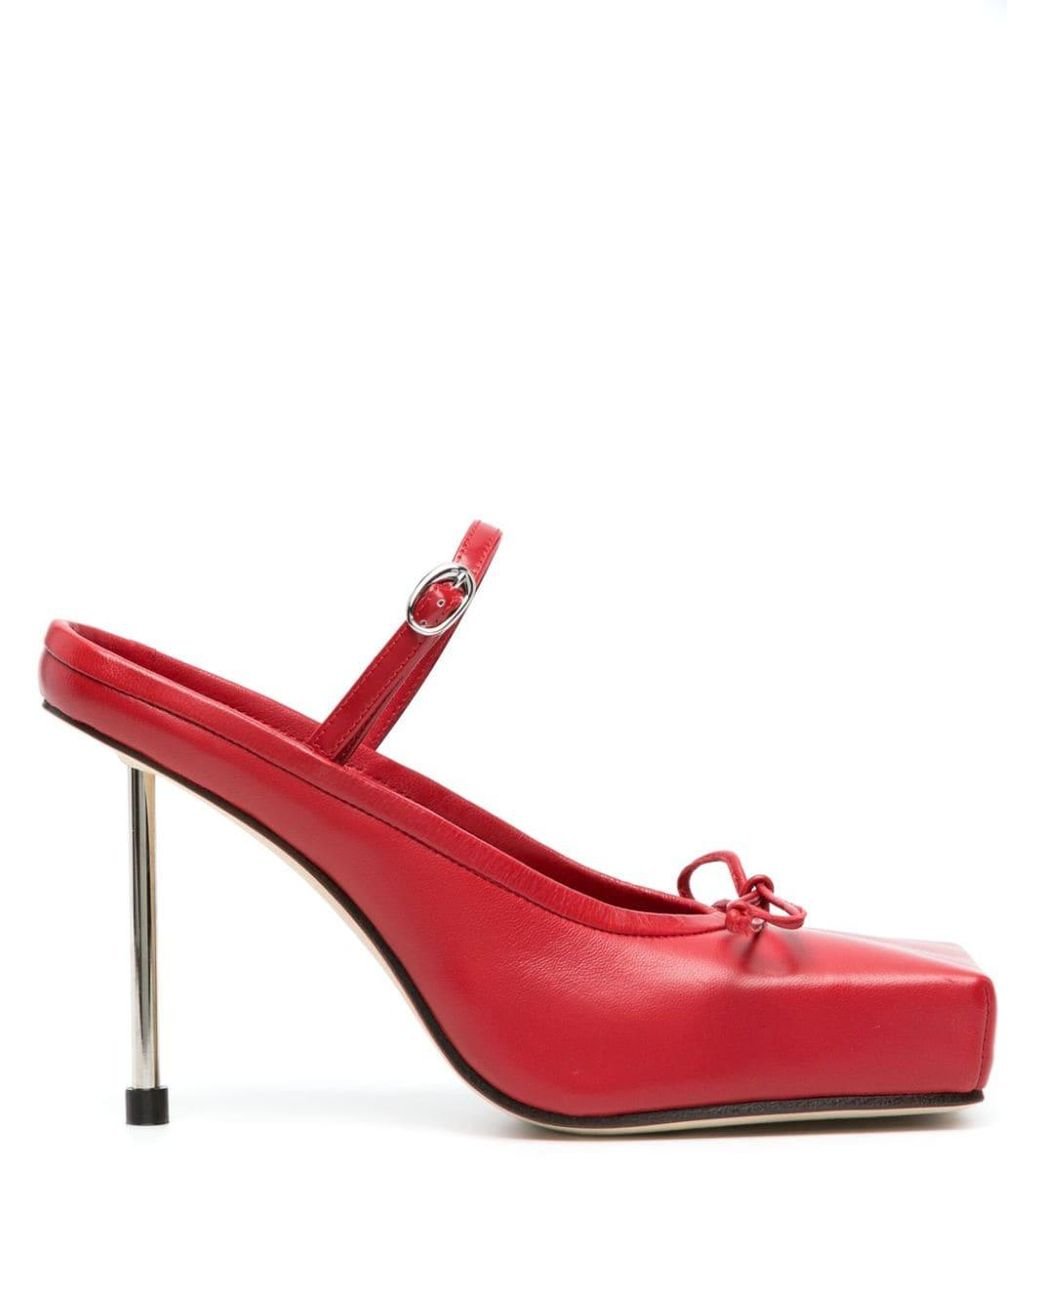 Jacquemus Les Chaussures Ballet 110mm Leather Mules in Red | Lyst